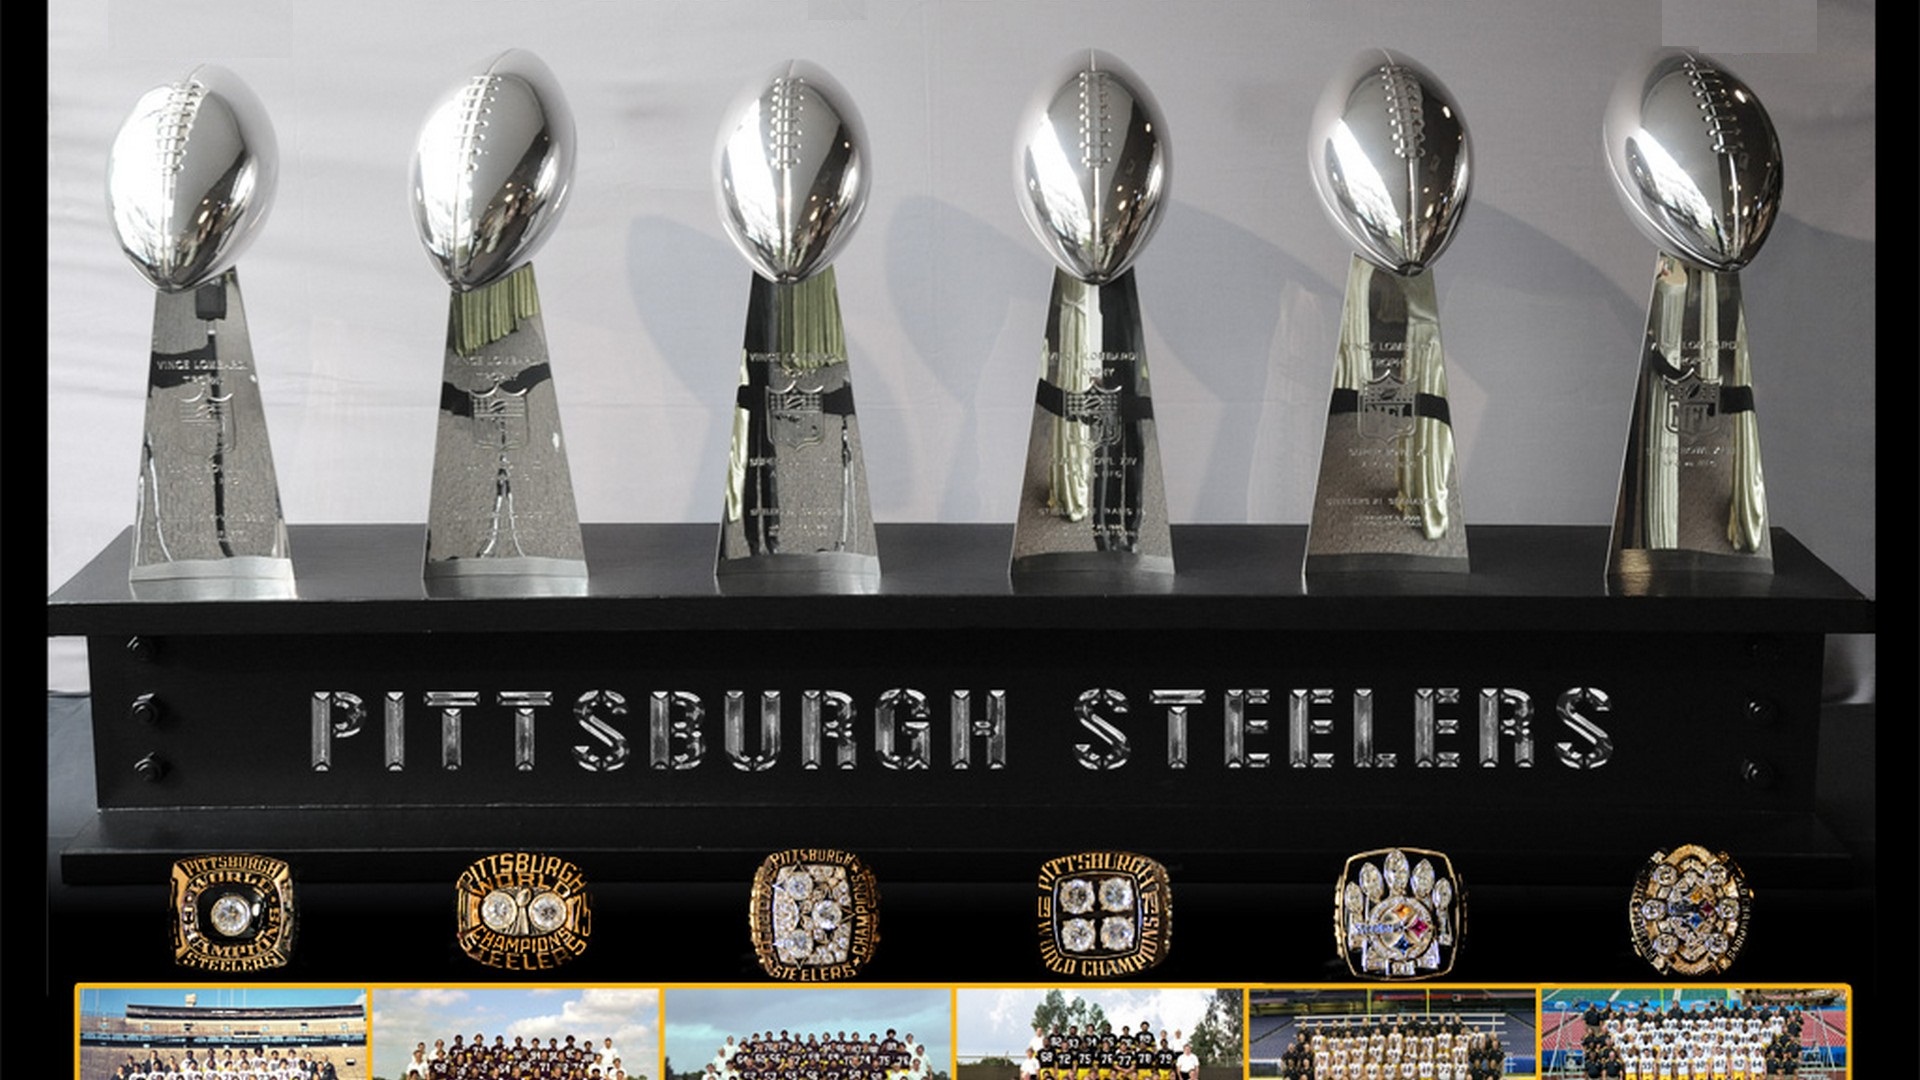 HD NFL Steelers Backgrounds With Resolution 1920X1080 pixel. You can make this wallpaper for your Mac or Windows Desktop Background, iPhone, Android or Tablet and another Smartphone device for free